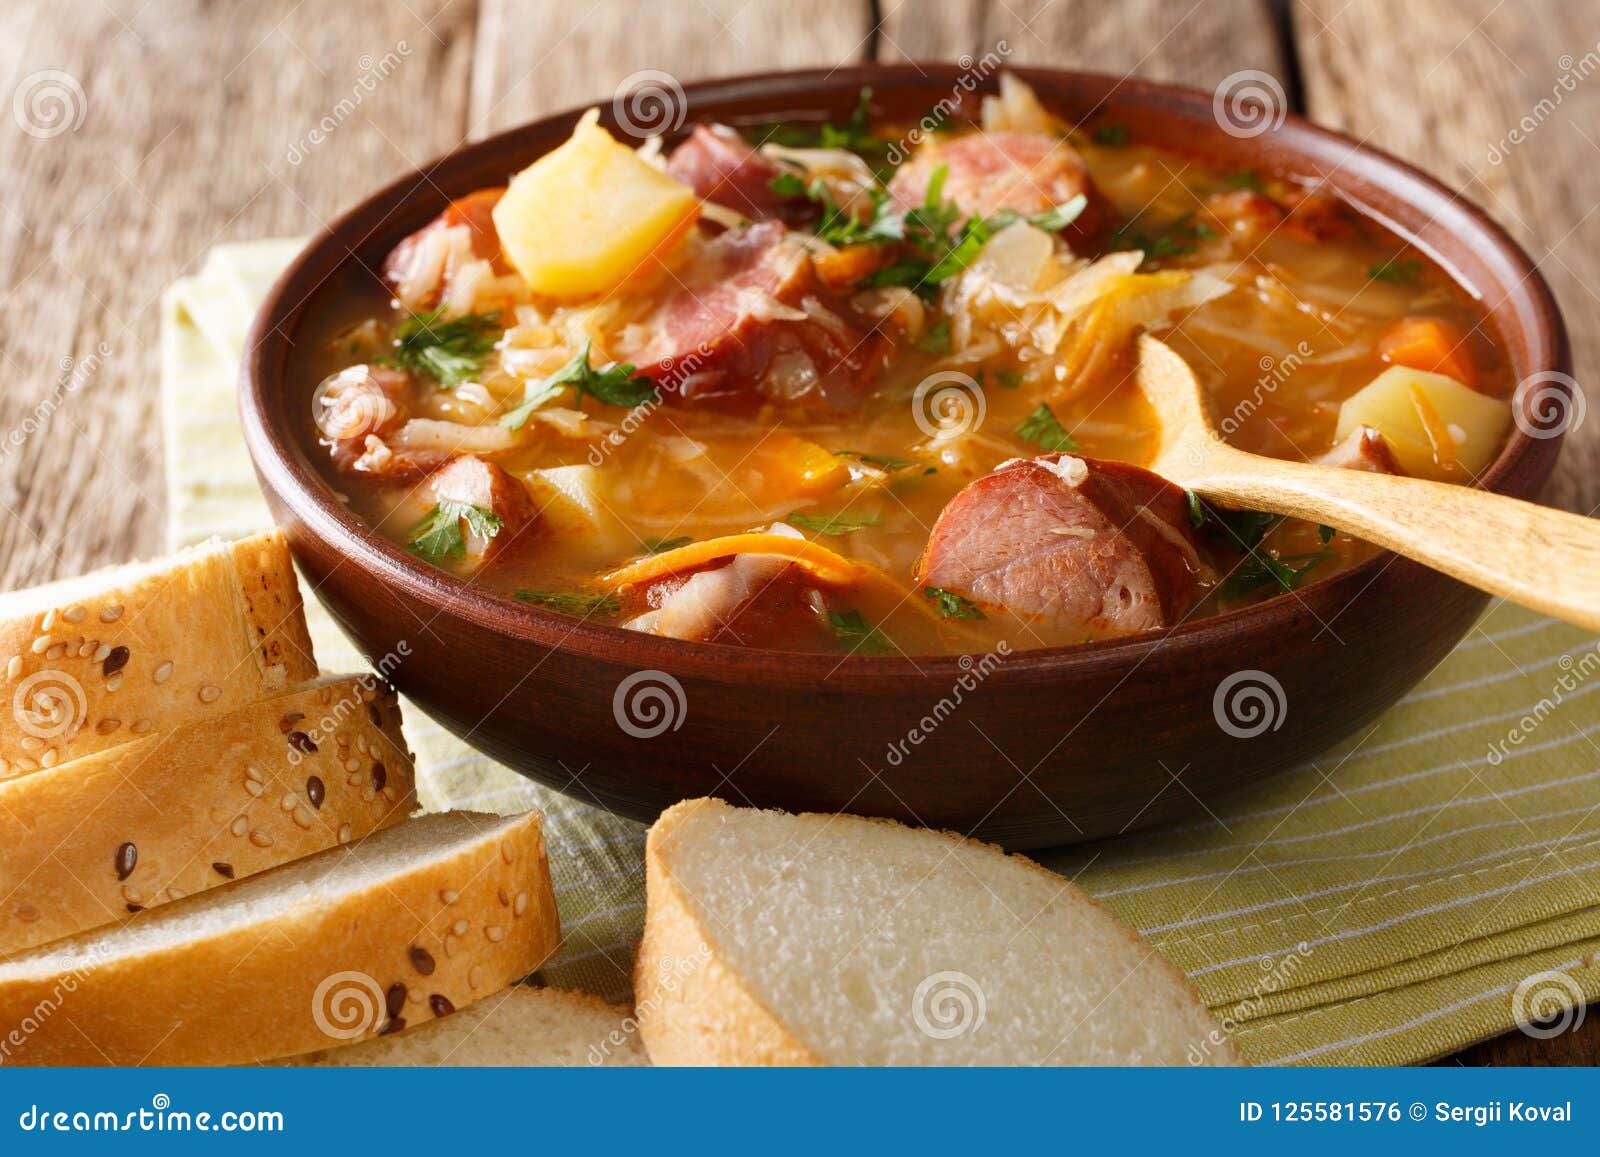 czech food: zelnacka cabbage soup with sausages and vegetables c